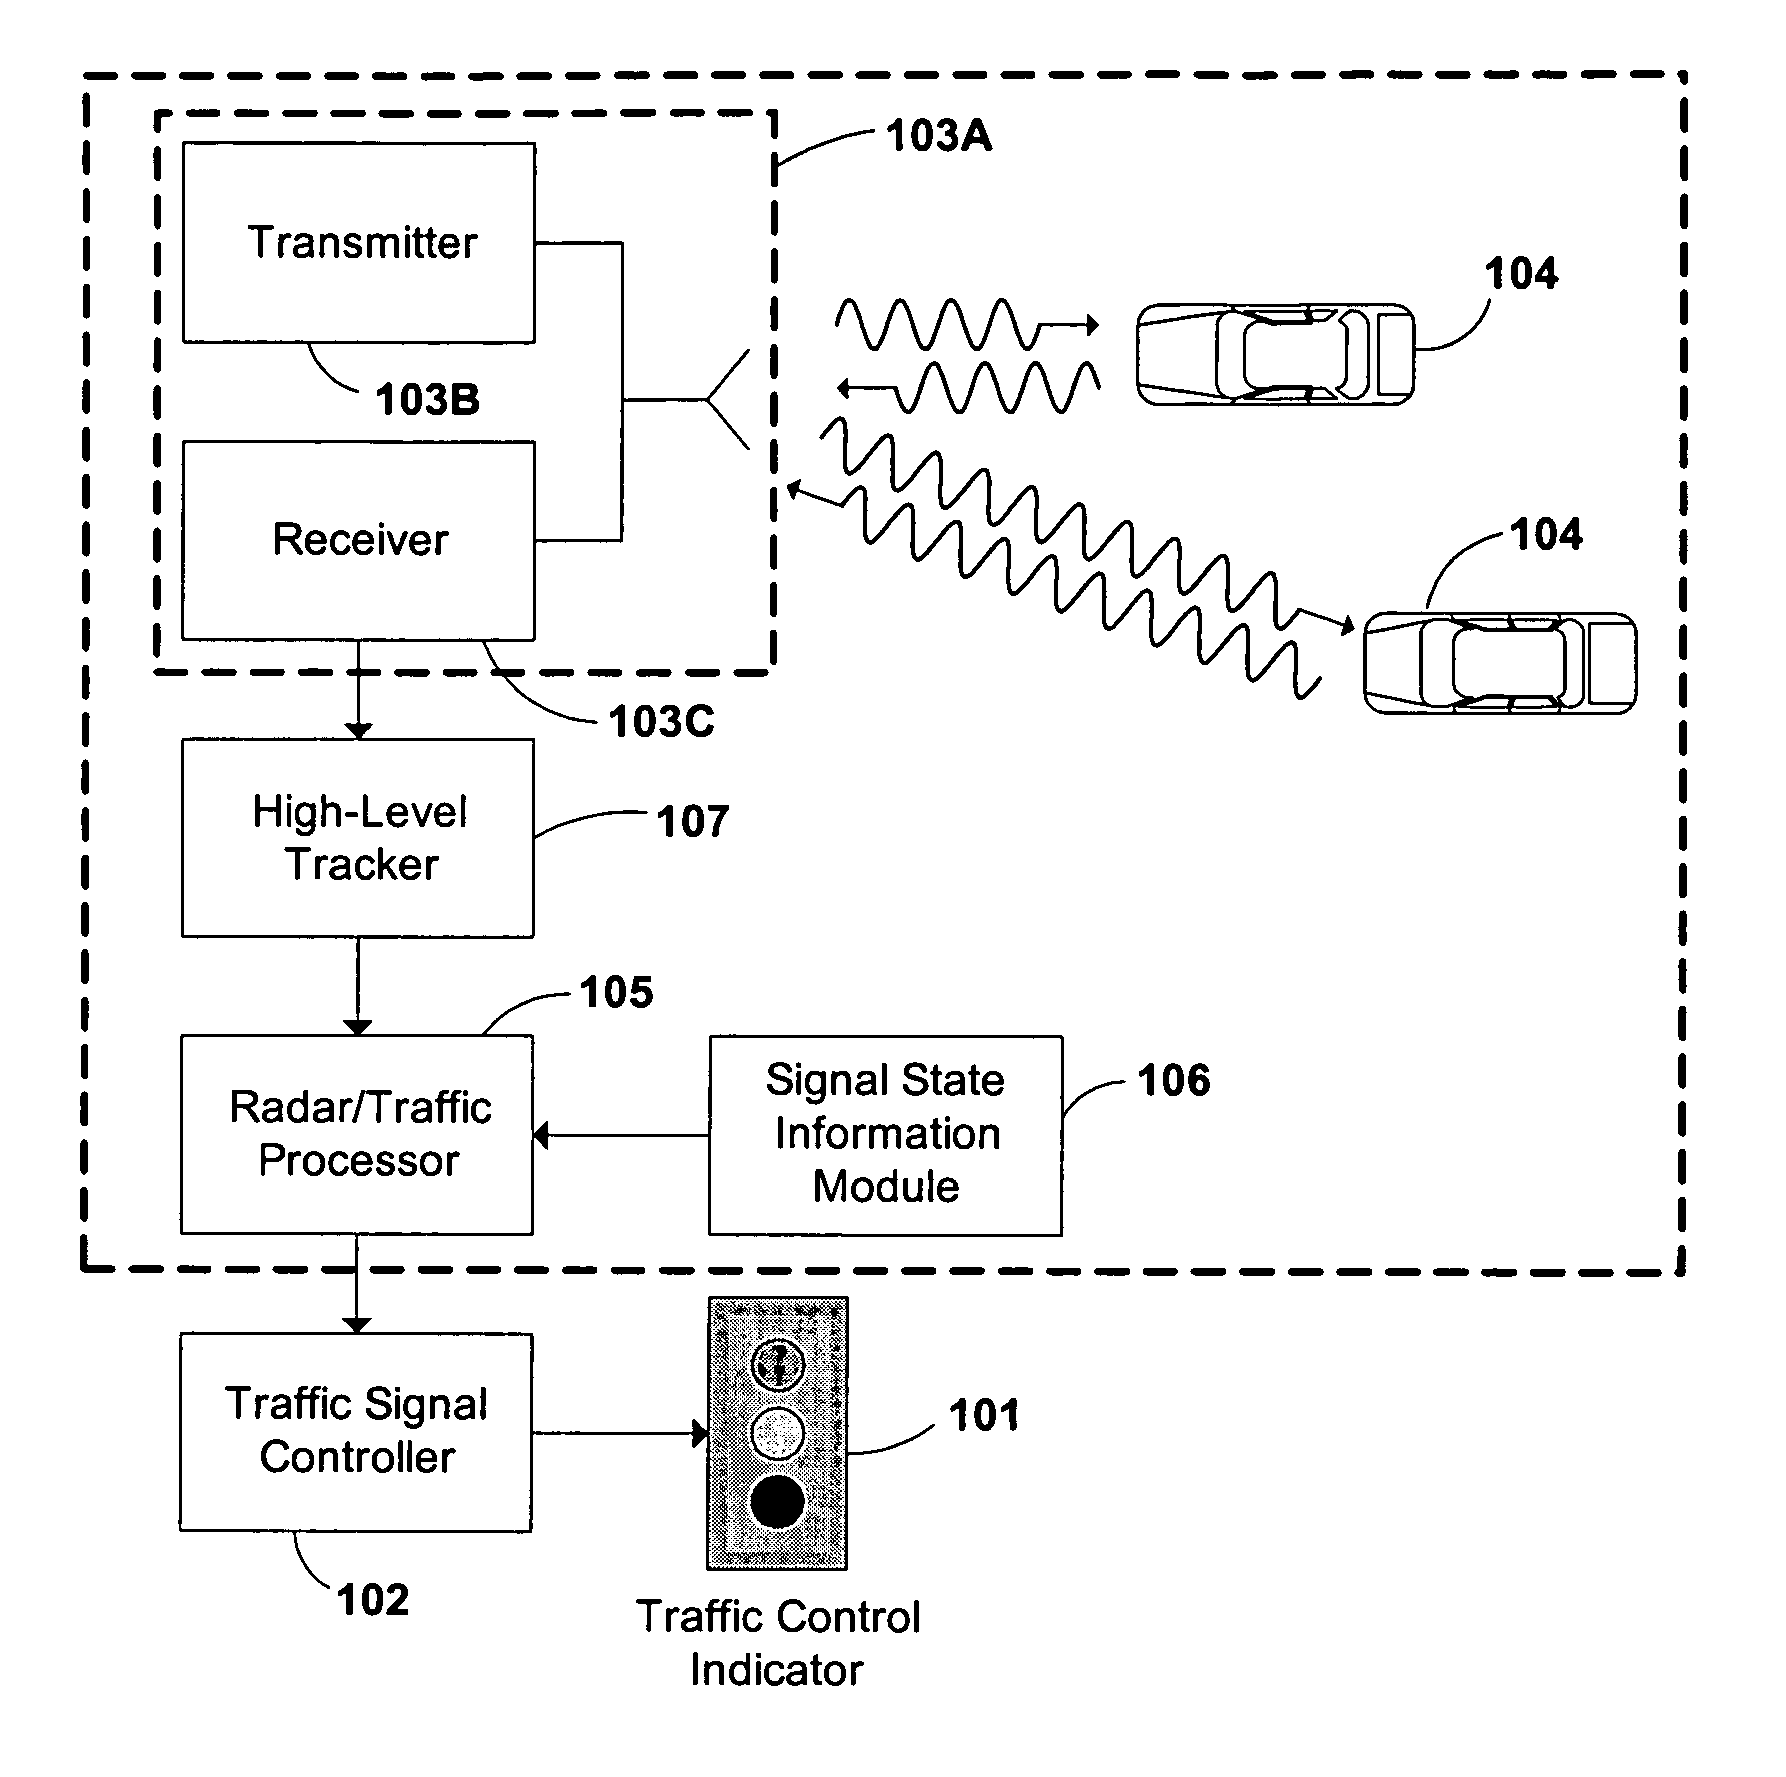 Traffic light signal system using radar-based target detection and tracking